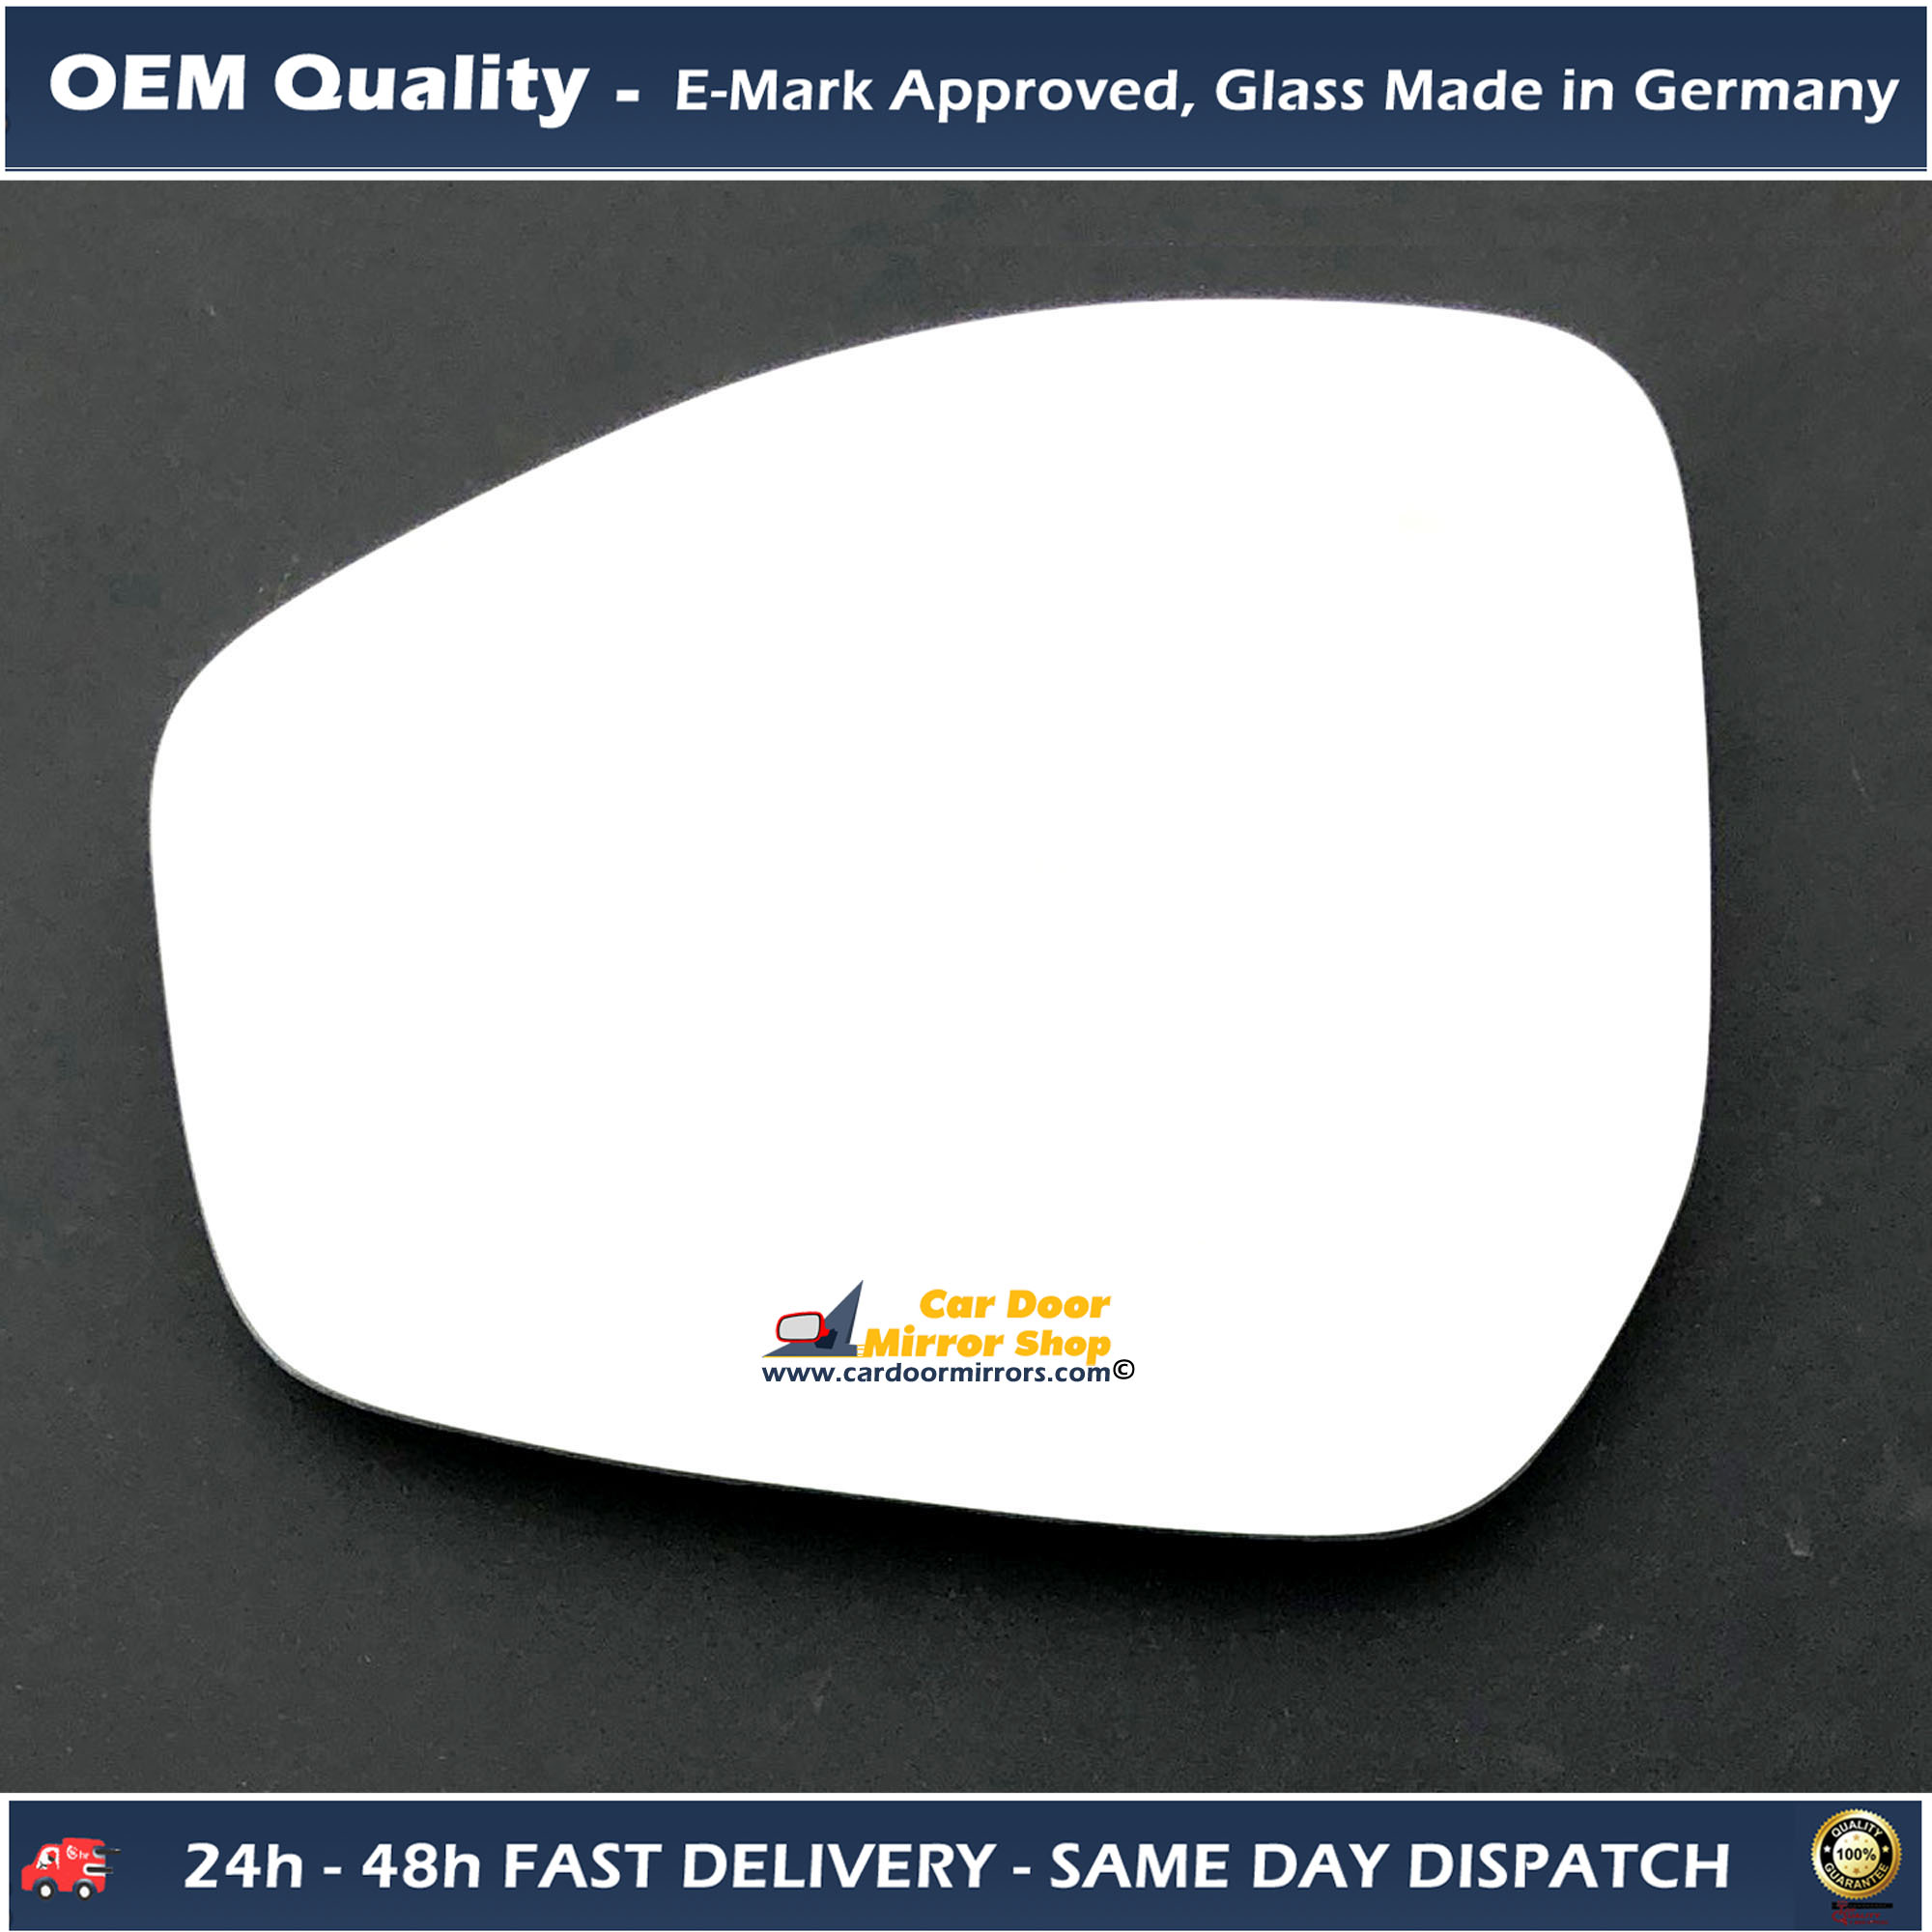 Land Rover Range Rover Wing Mirror Glass LEFT HAND ( UK Passenger Side ) 2013 to 2020 – Convex Wing Mirror